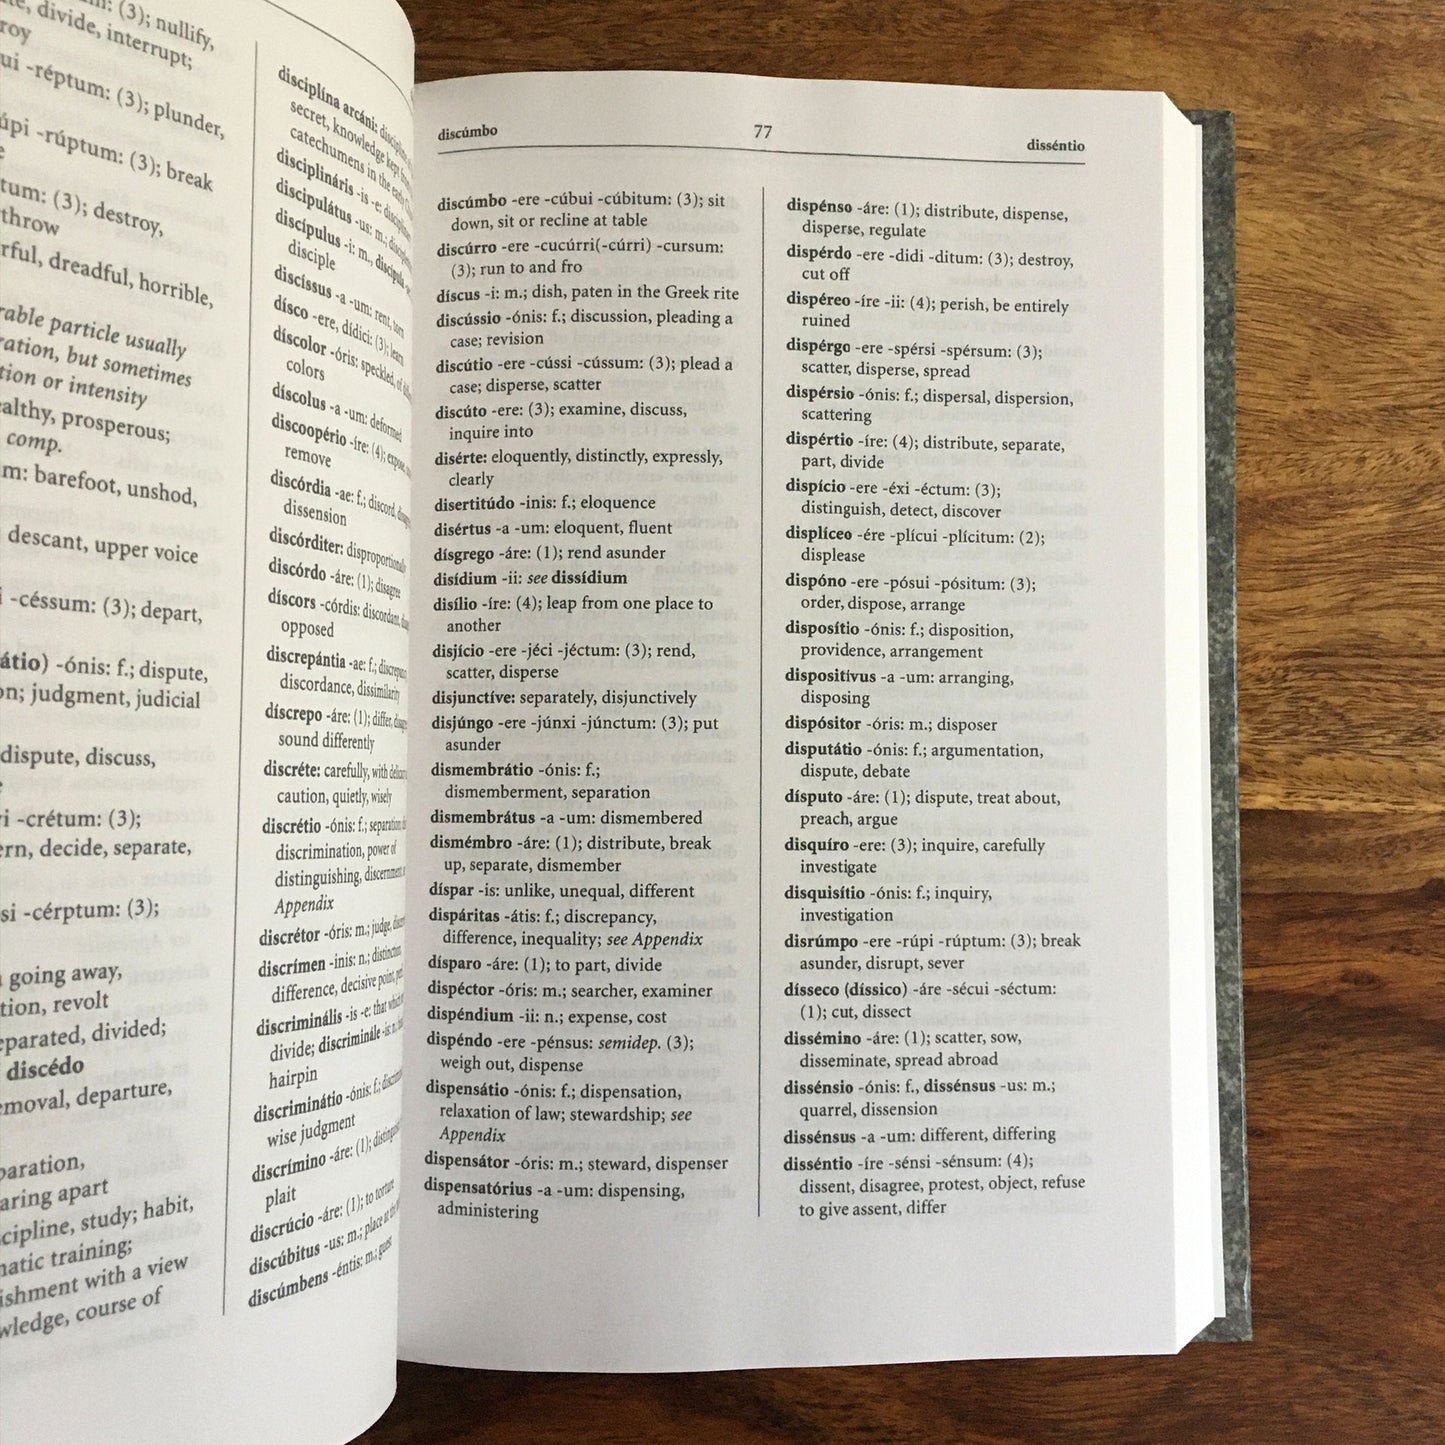 Dictionary of Ecclesiastical Latin - Leo F. Stelten